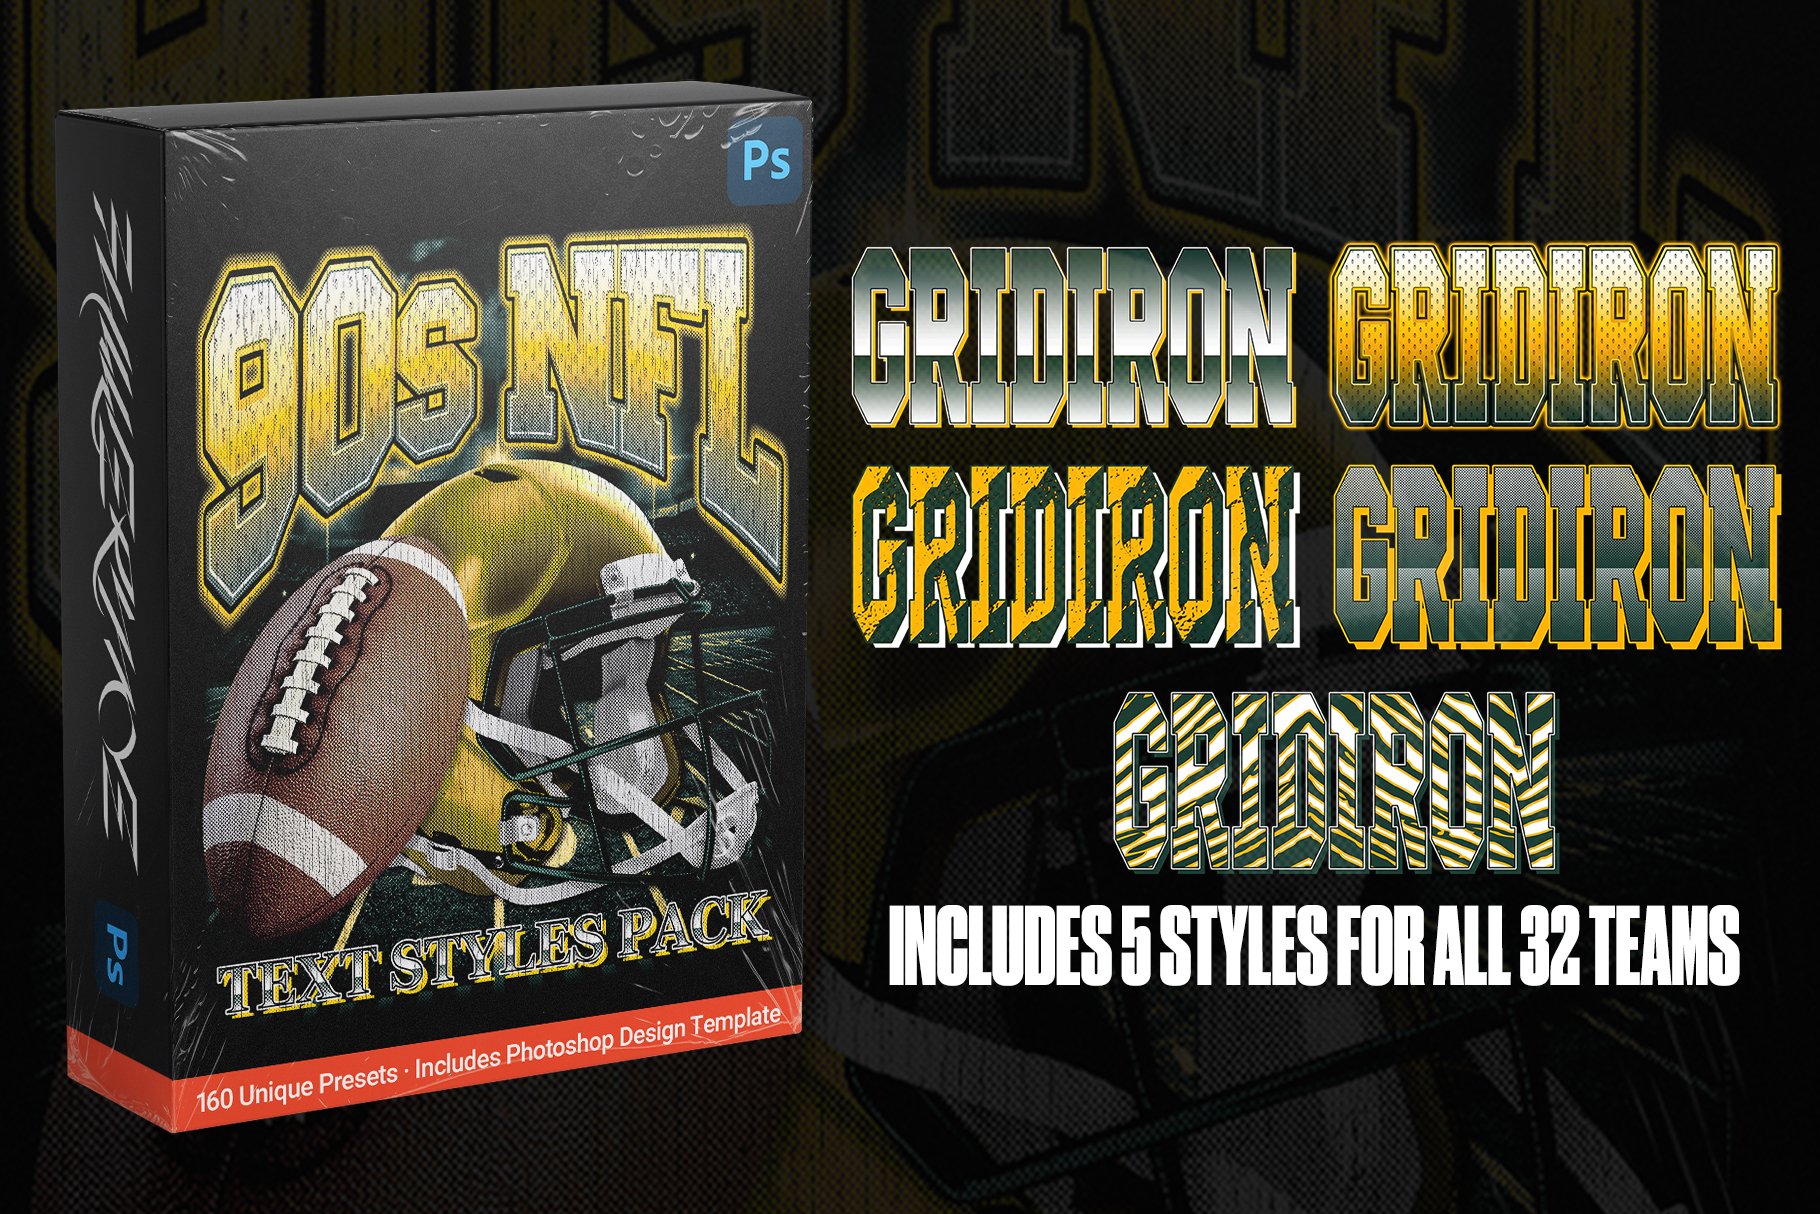 90s NFL Text Styles Pack • Vol 1cover image.